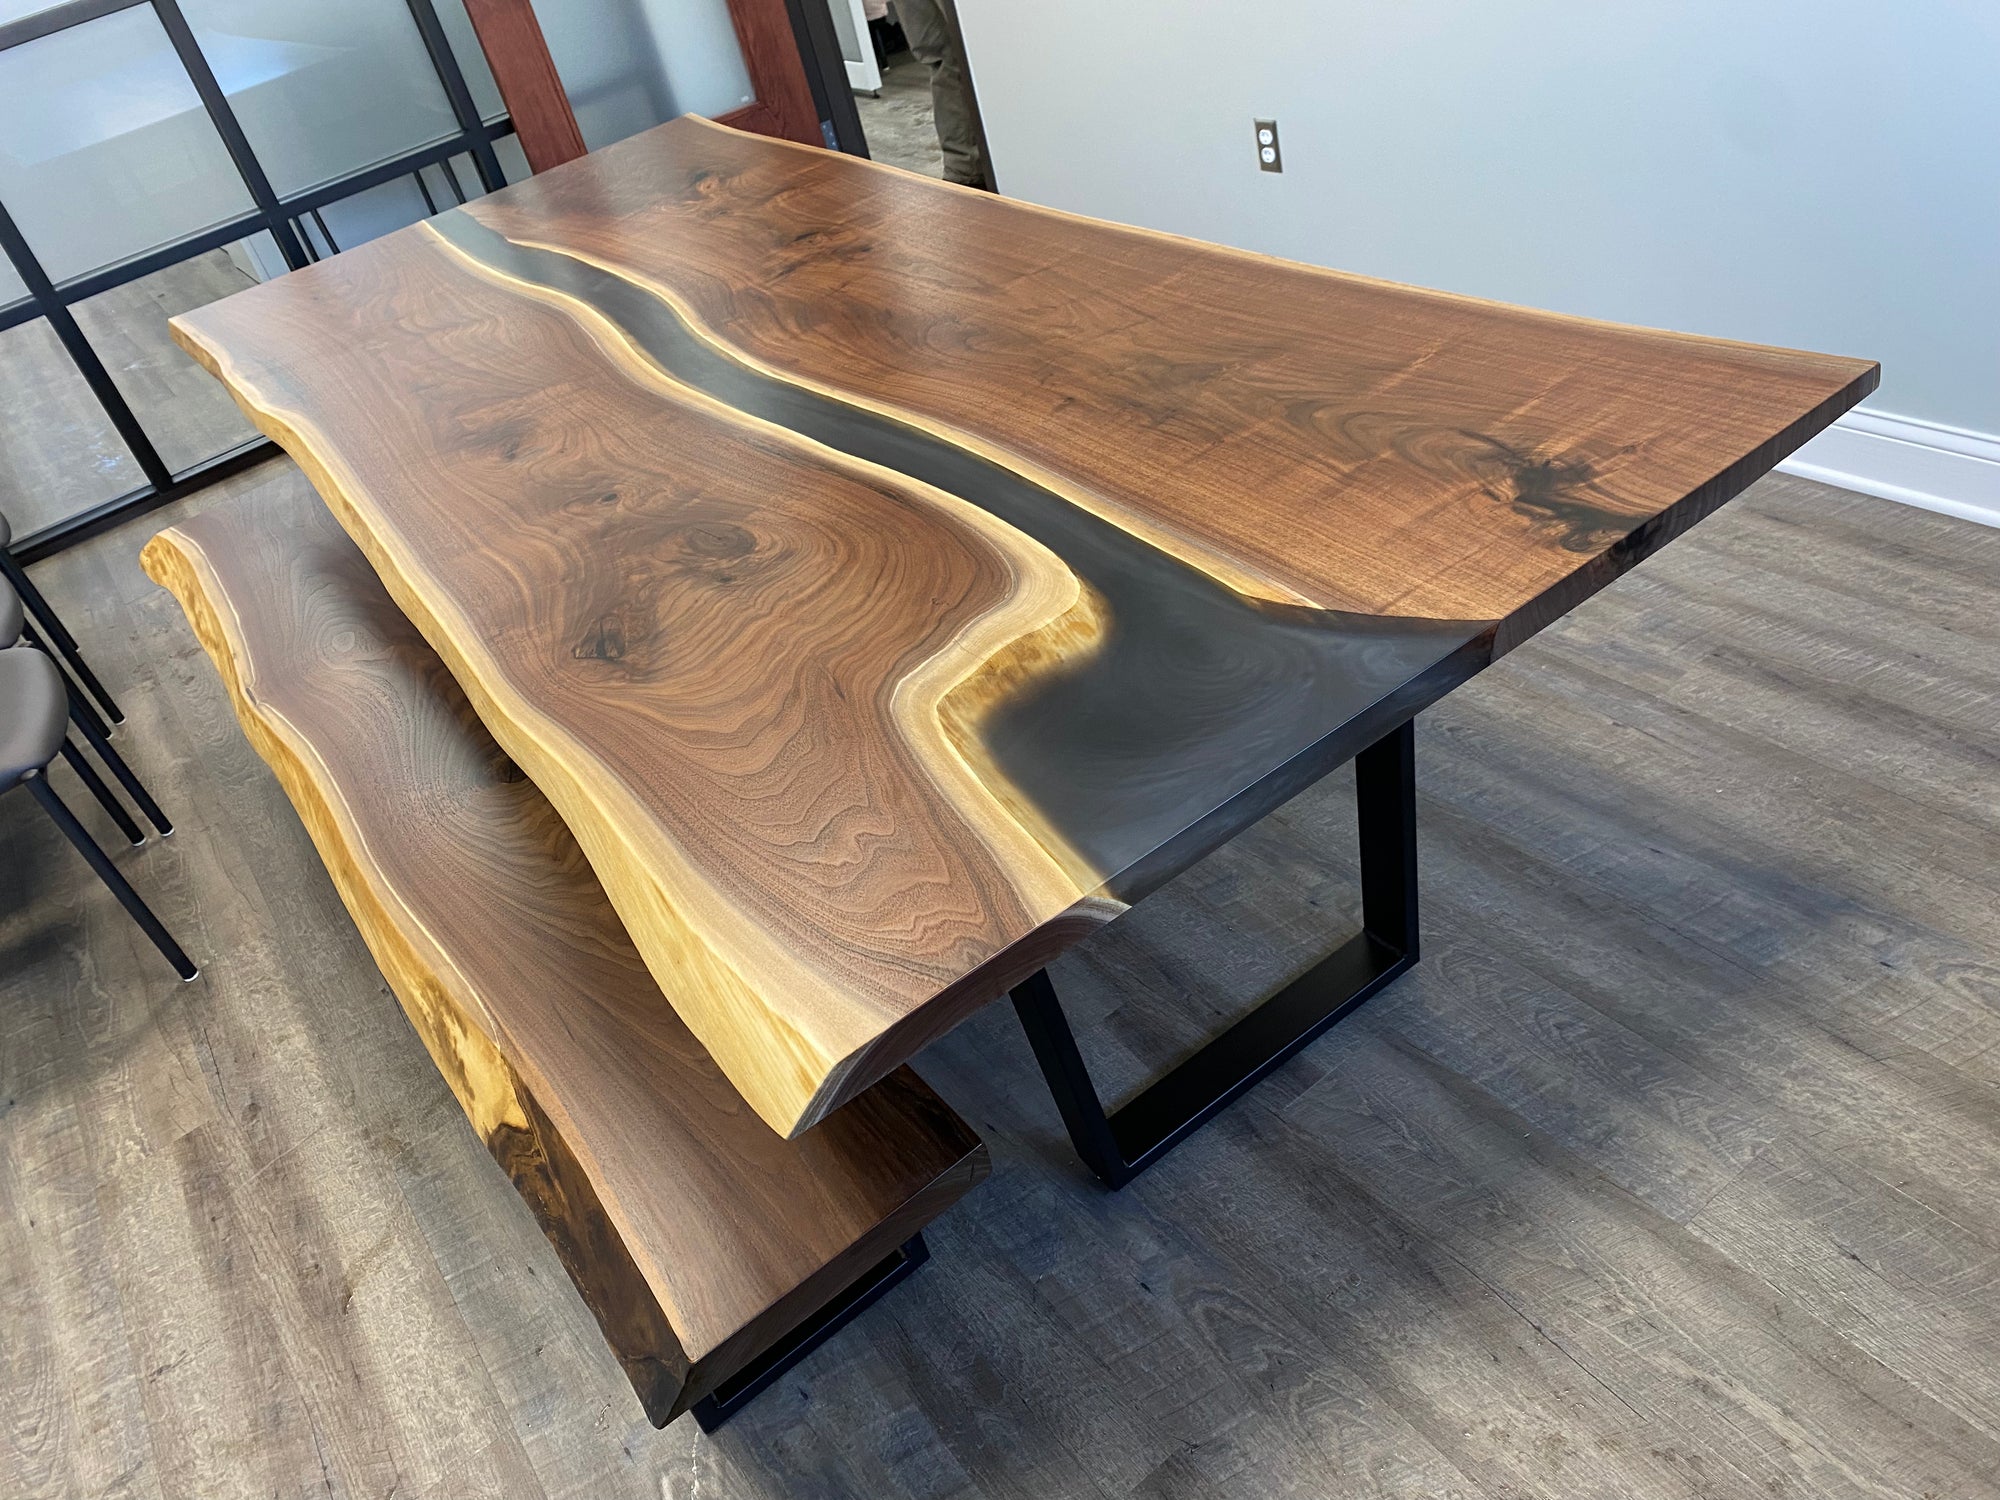 Black Resin Table, Epoxy Dining Table, Epoxy Resin Table, Custom 56 X 36  Walnut Table, Black Epoxy River Dining Table for Troy -  Norway